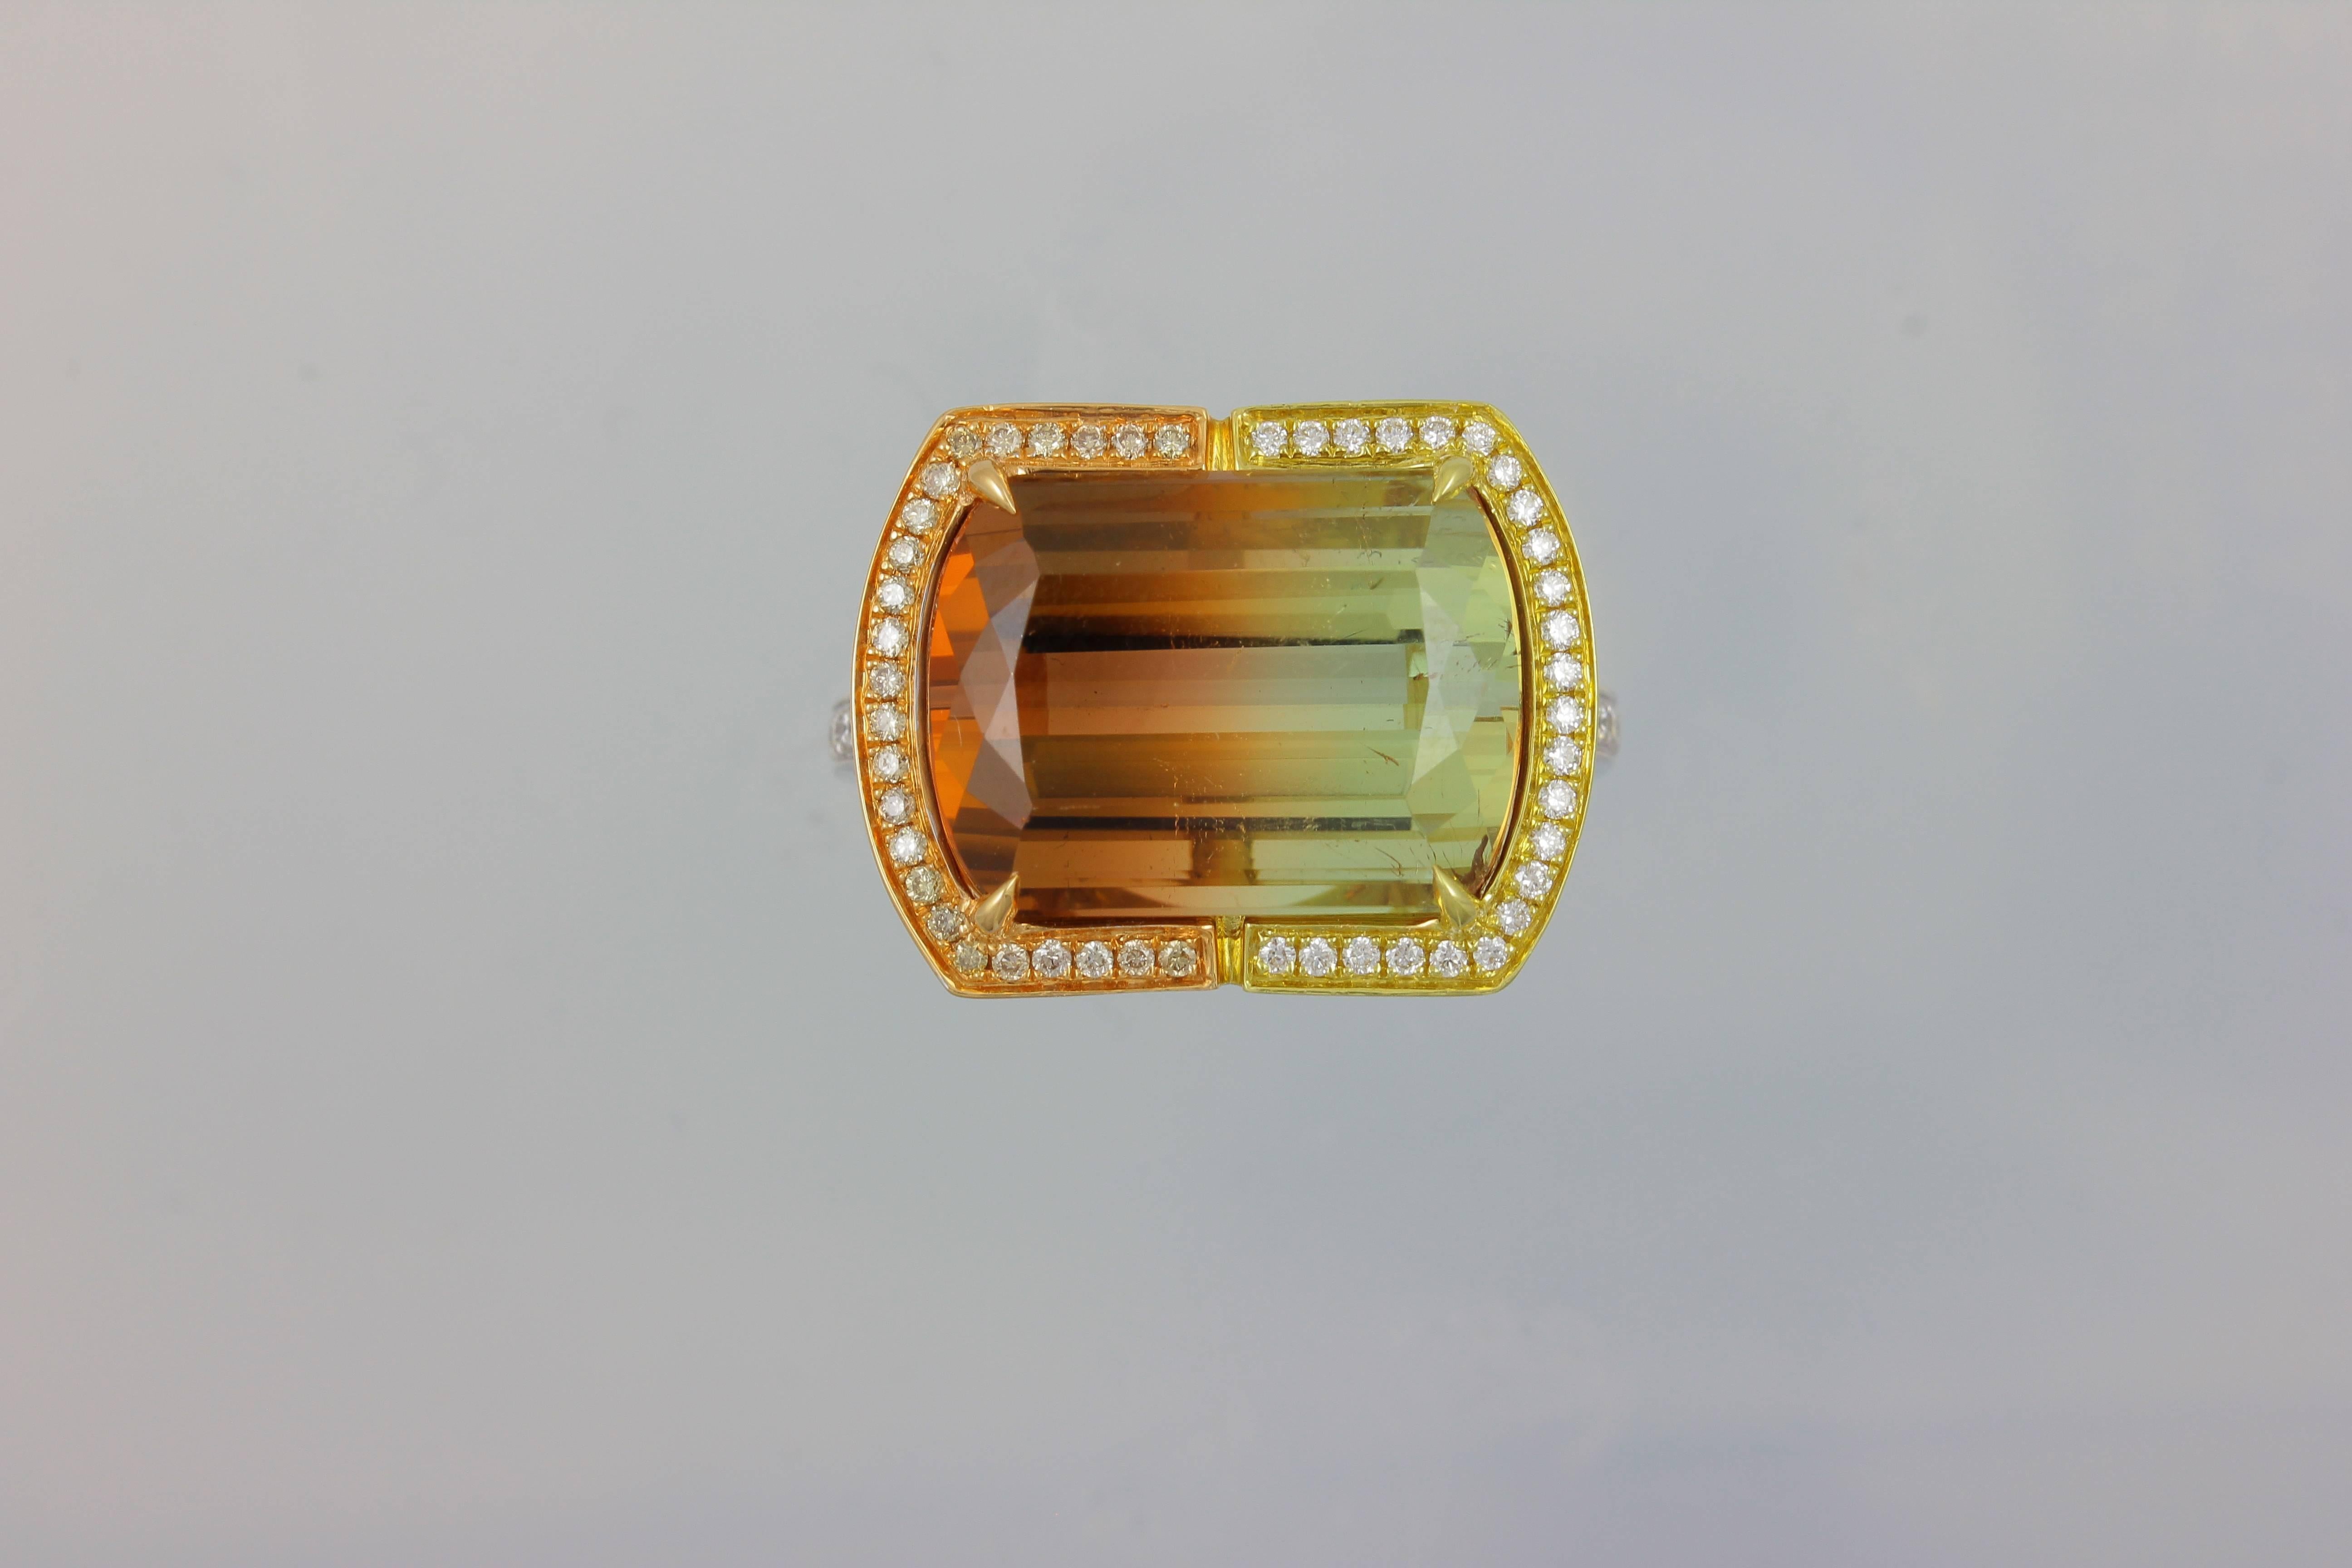 18K PYWG LARGE HORIZONTAL EMERALD CUT BI- COLOR TOURMALINE WITH BROWN AND WHITE DIAMONDS ONE OF A KIND RING 
Tourmaline 16.75 Carats, 58 Diamonds  0.28 Carats  27 Brown Diamonds  0.13 Carats